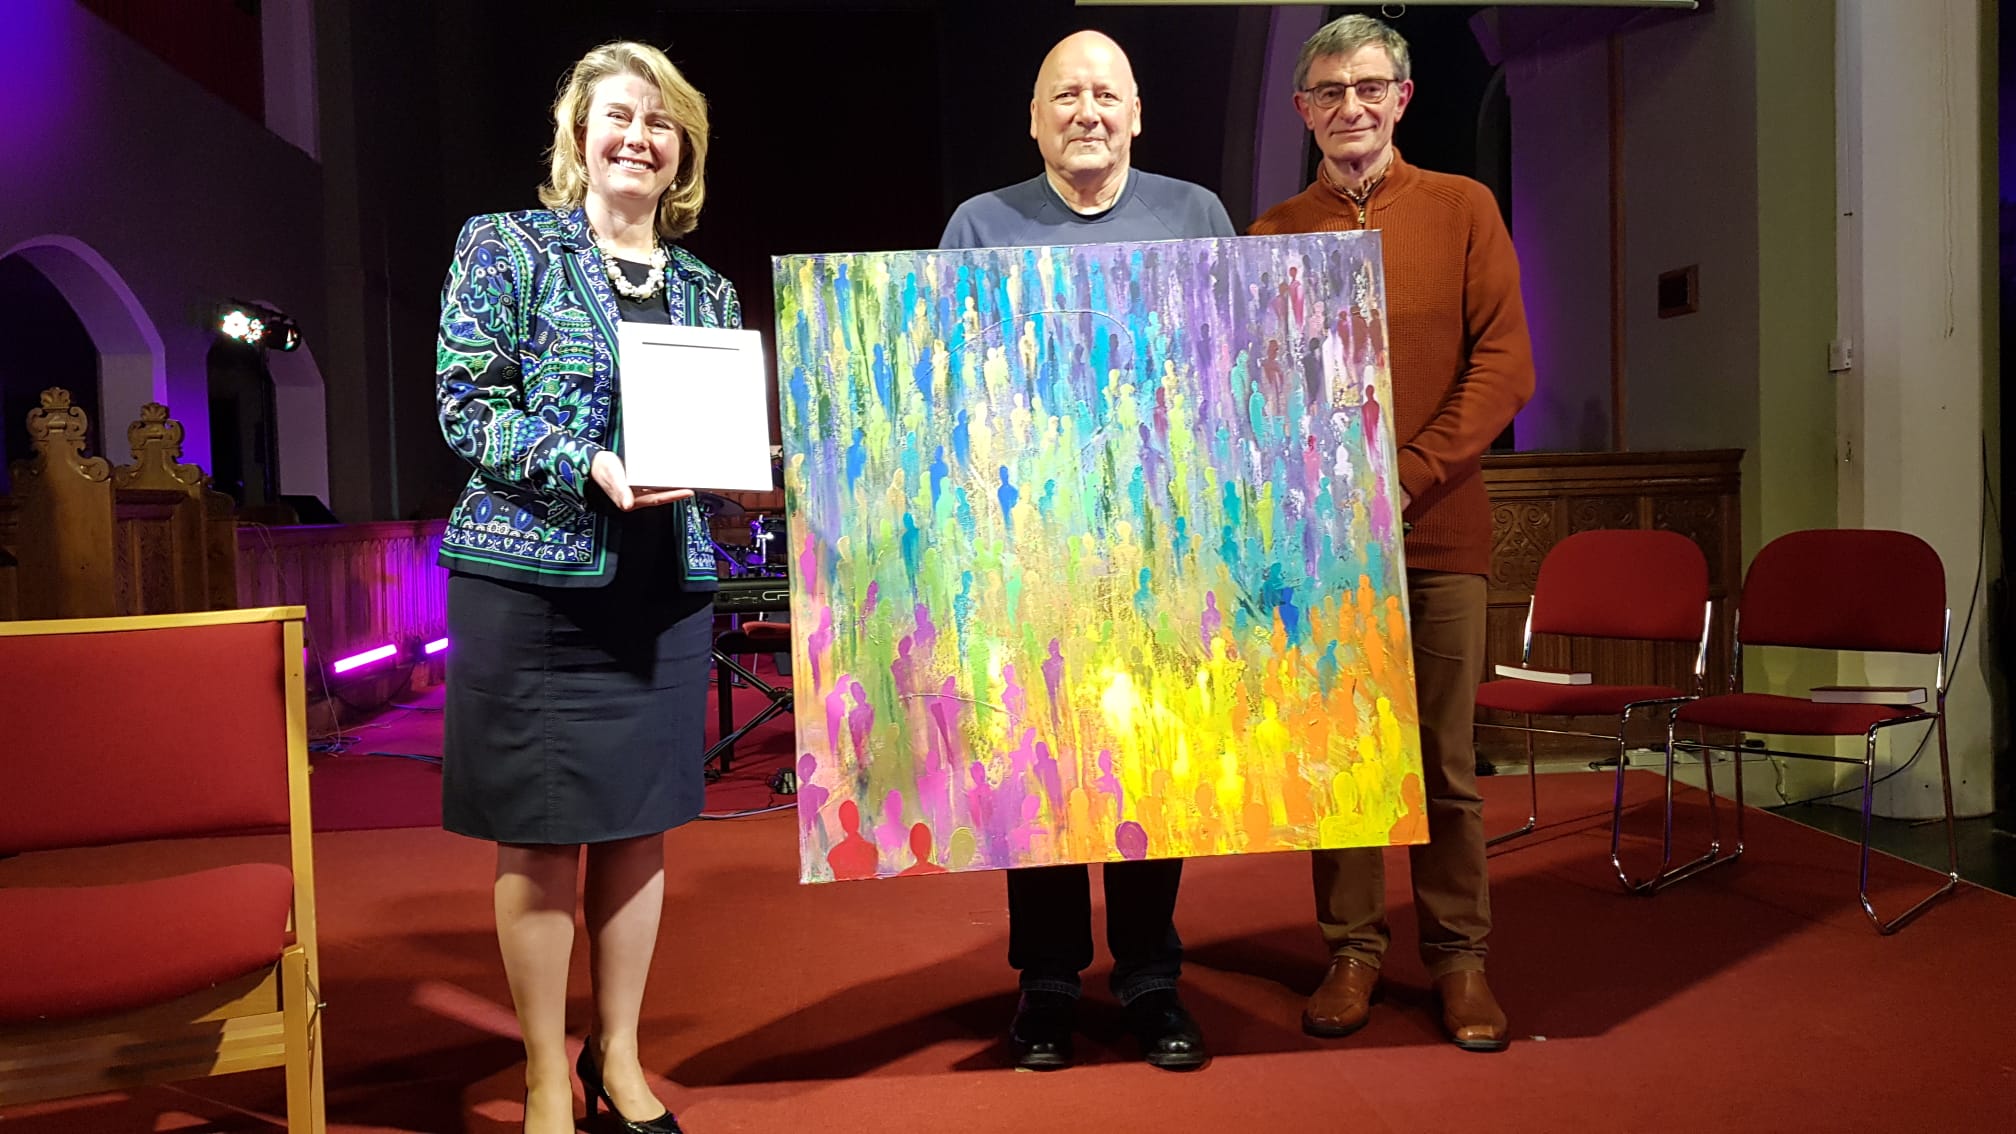 City of Light artwork by Helen Yousaf presented to Anna Firth MP